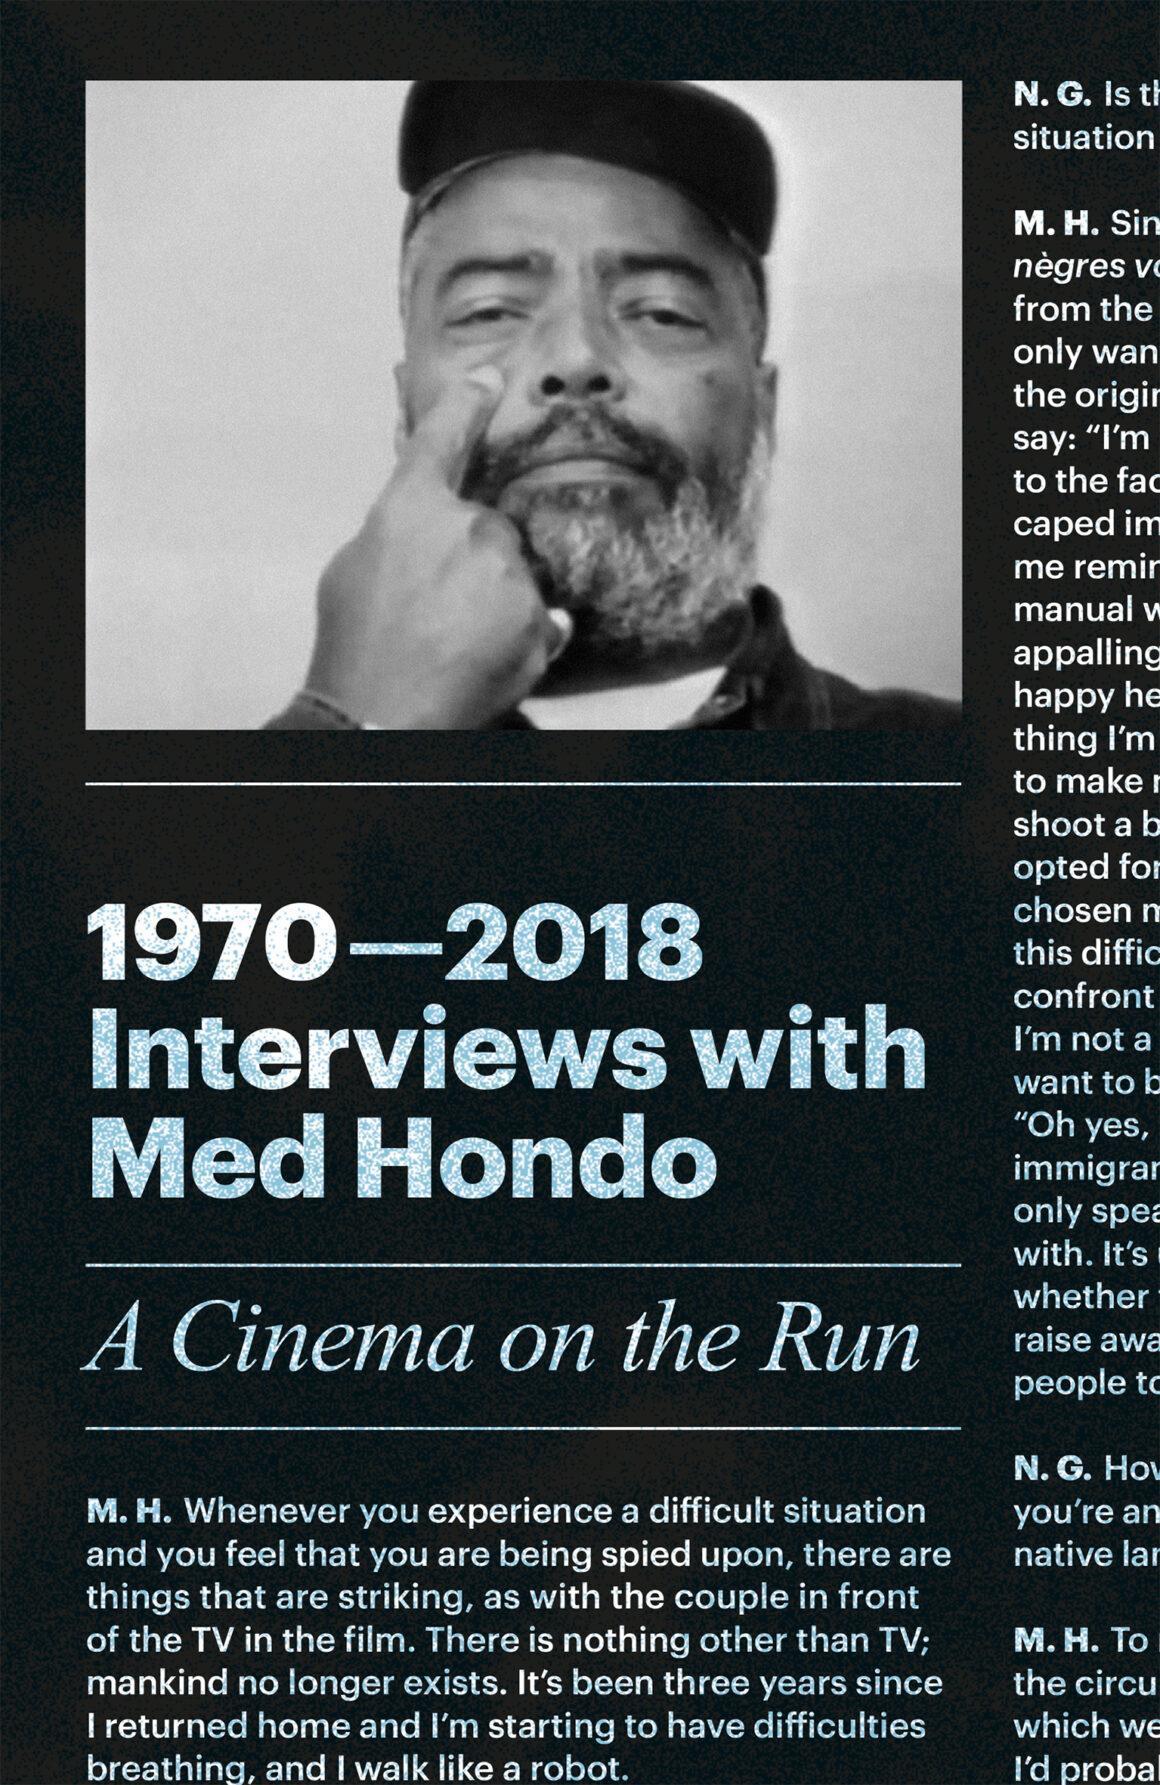 1970–2018 Interviews with Med Hondo